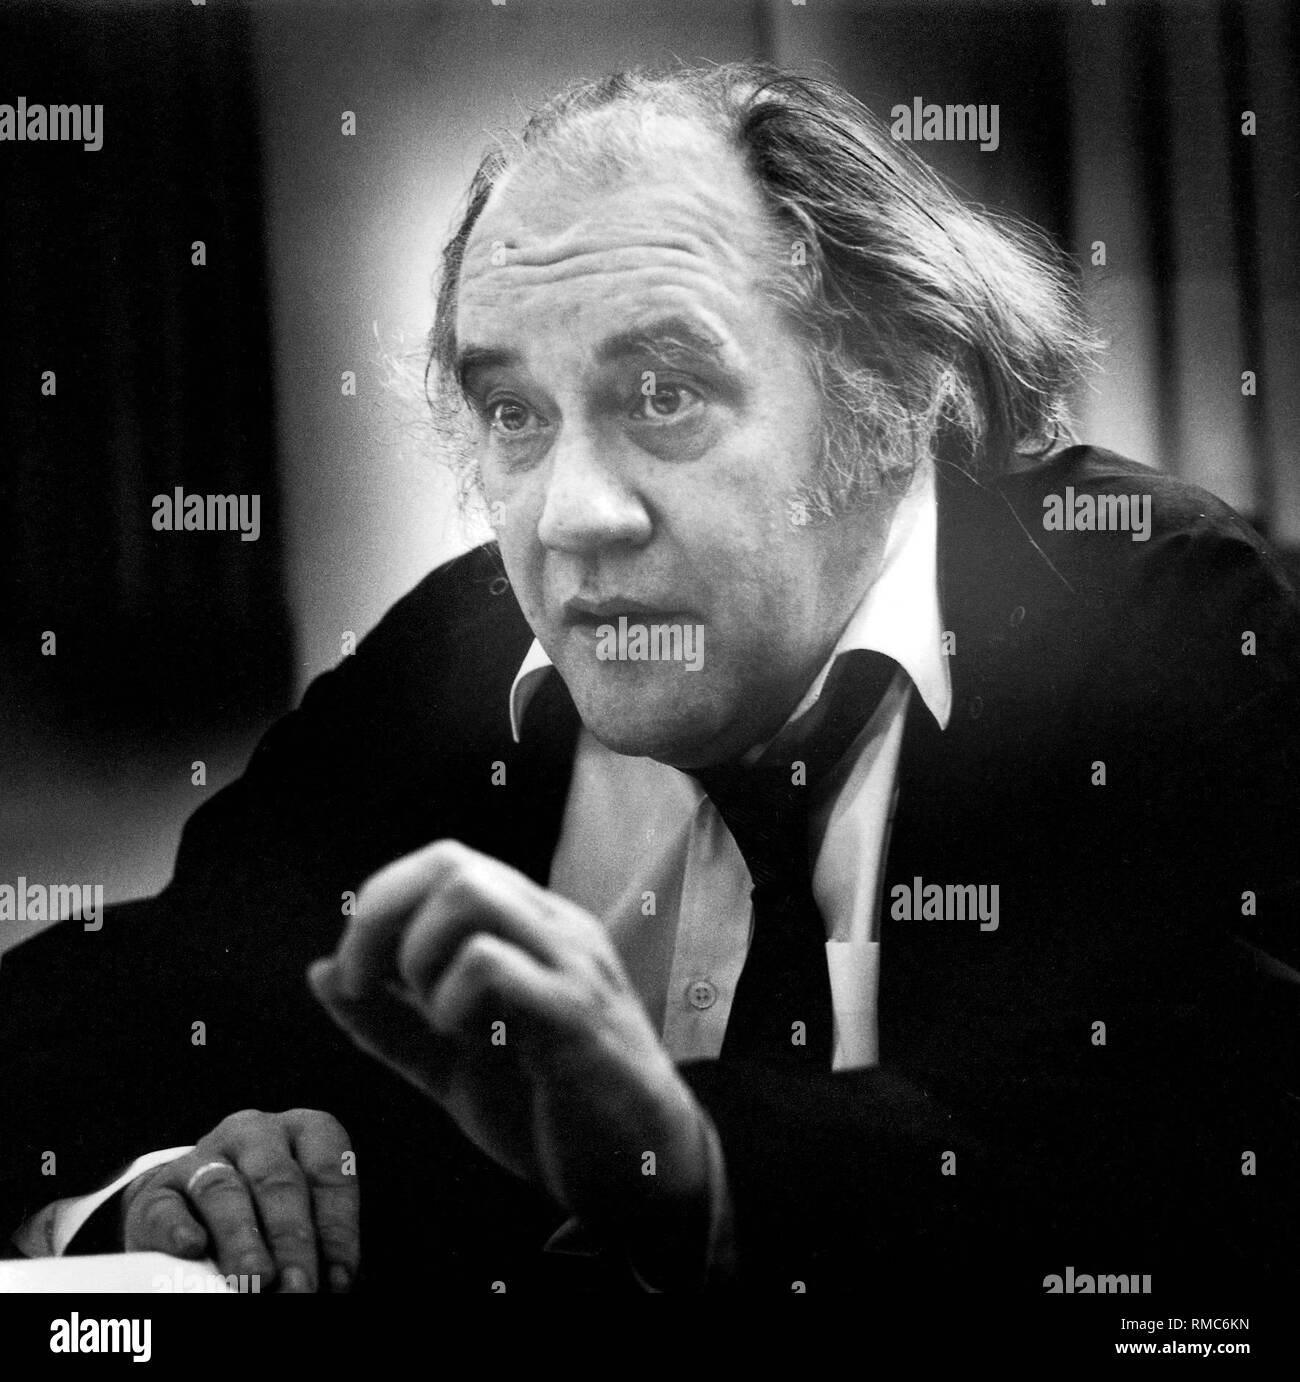 August Everding (1928-1999), a German theater manager and director. Stock Photo